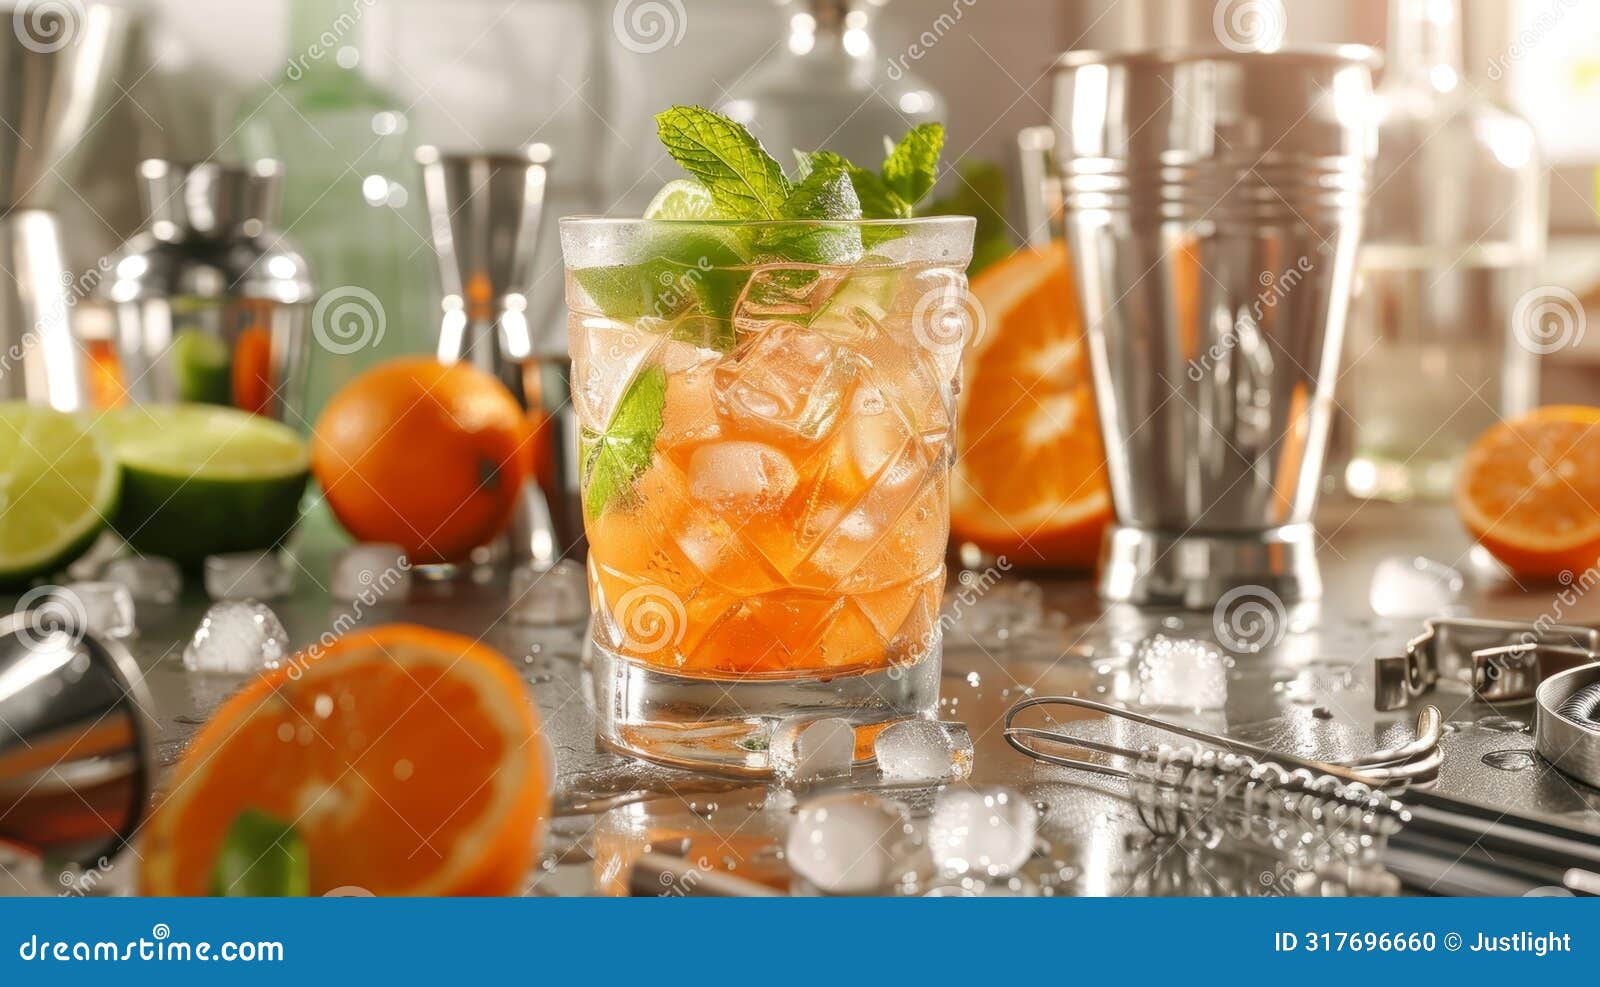 learn the art of mixology as you experiment with a variety of tools and ingredients perfect for crafting refreshing